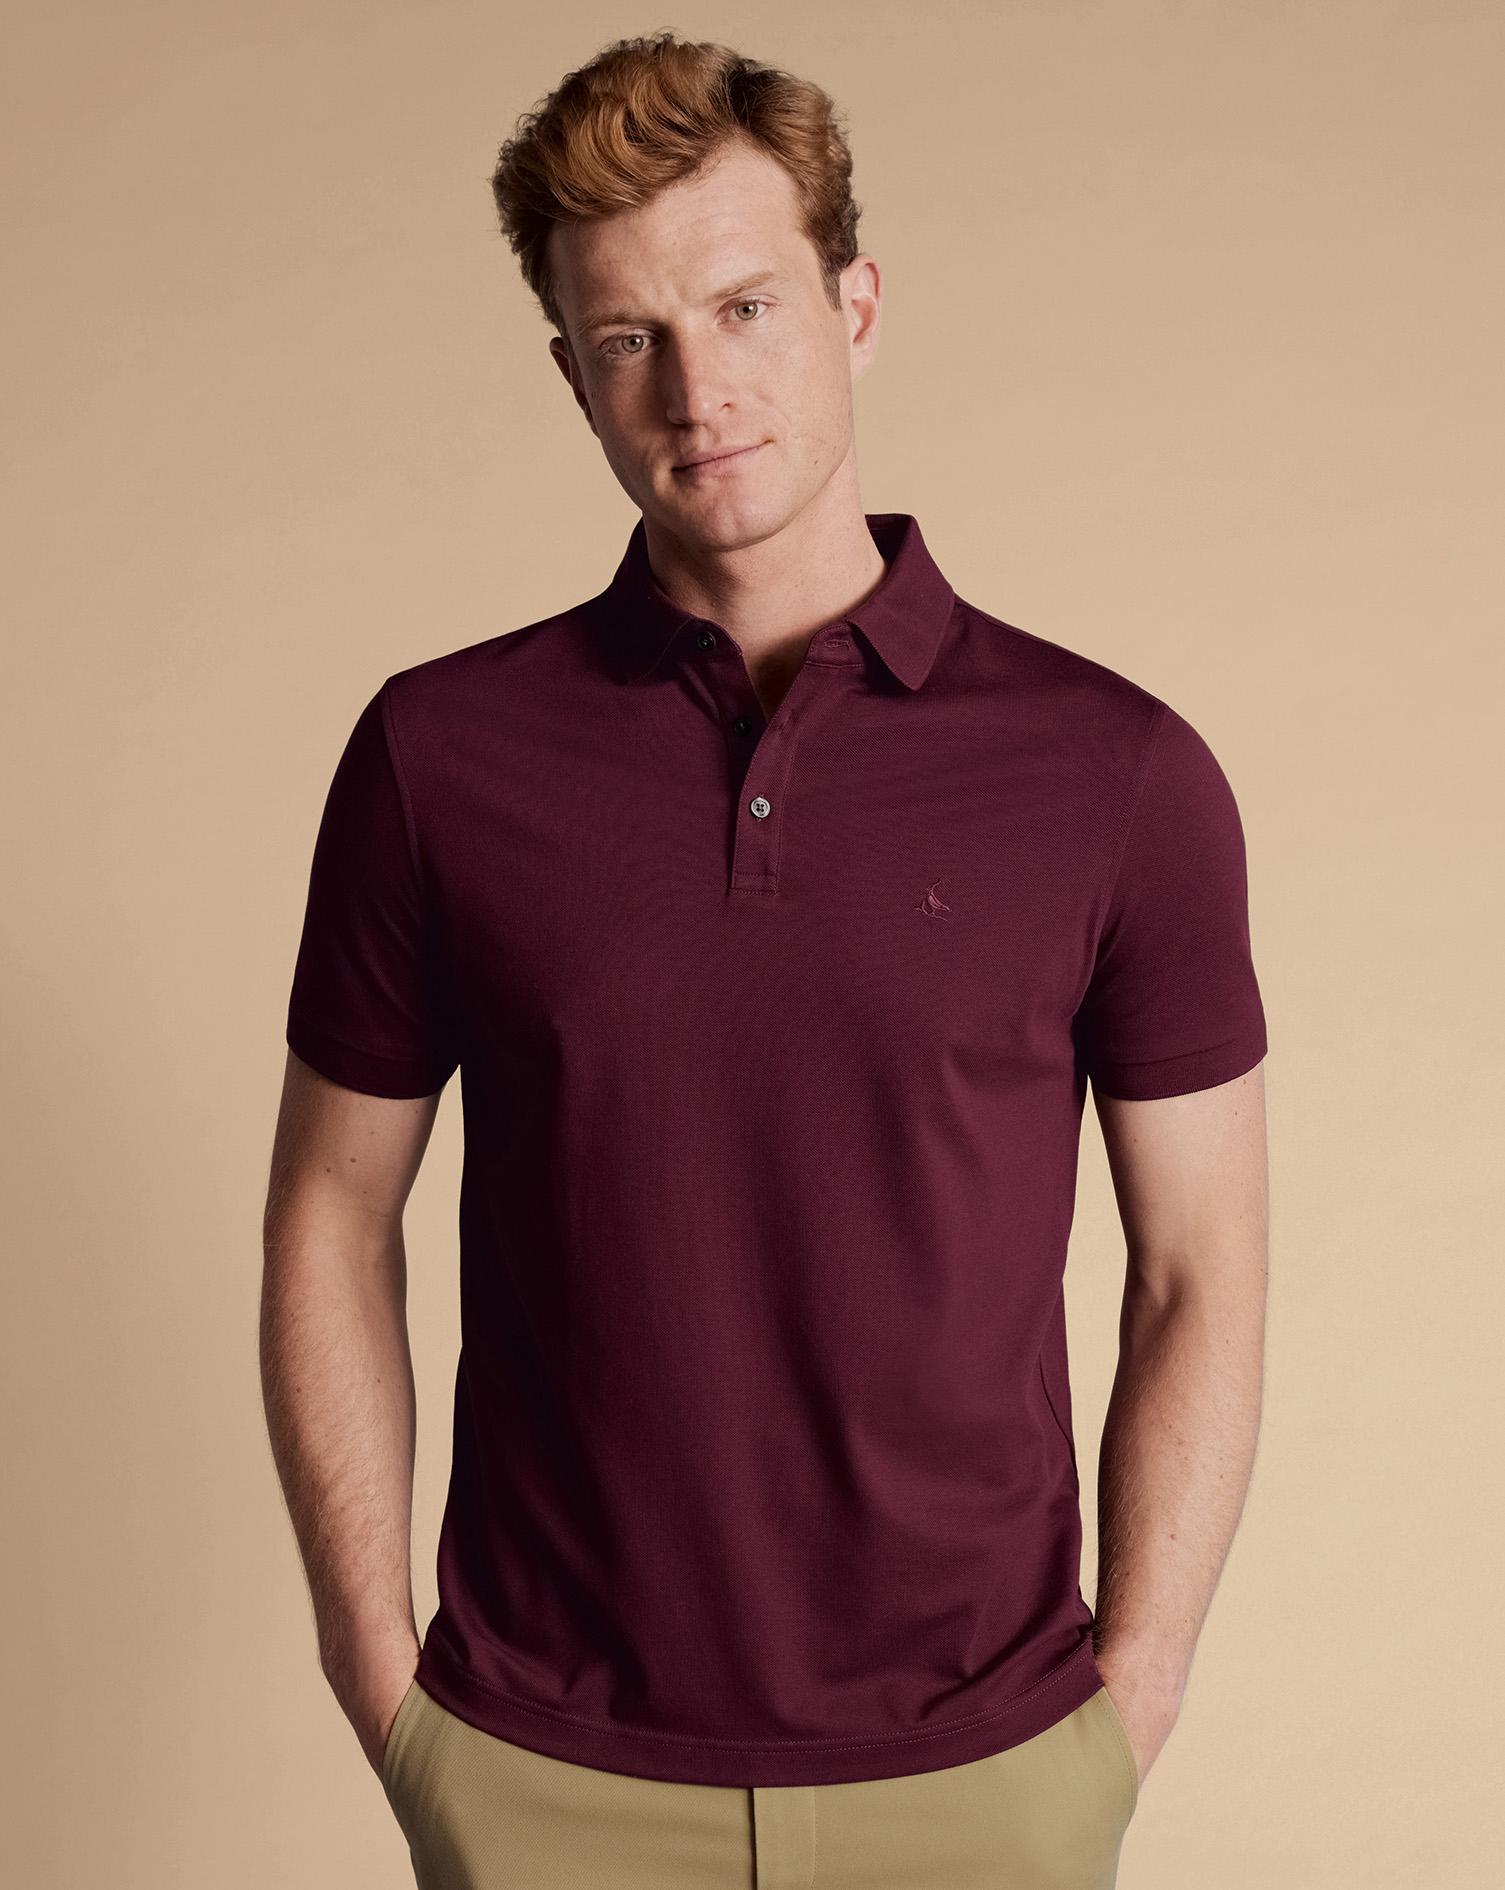 Men's Charles Tyrwhitt Pique Polo Shirt - Wine Red Size Small Cotton
